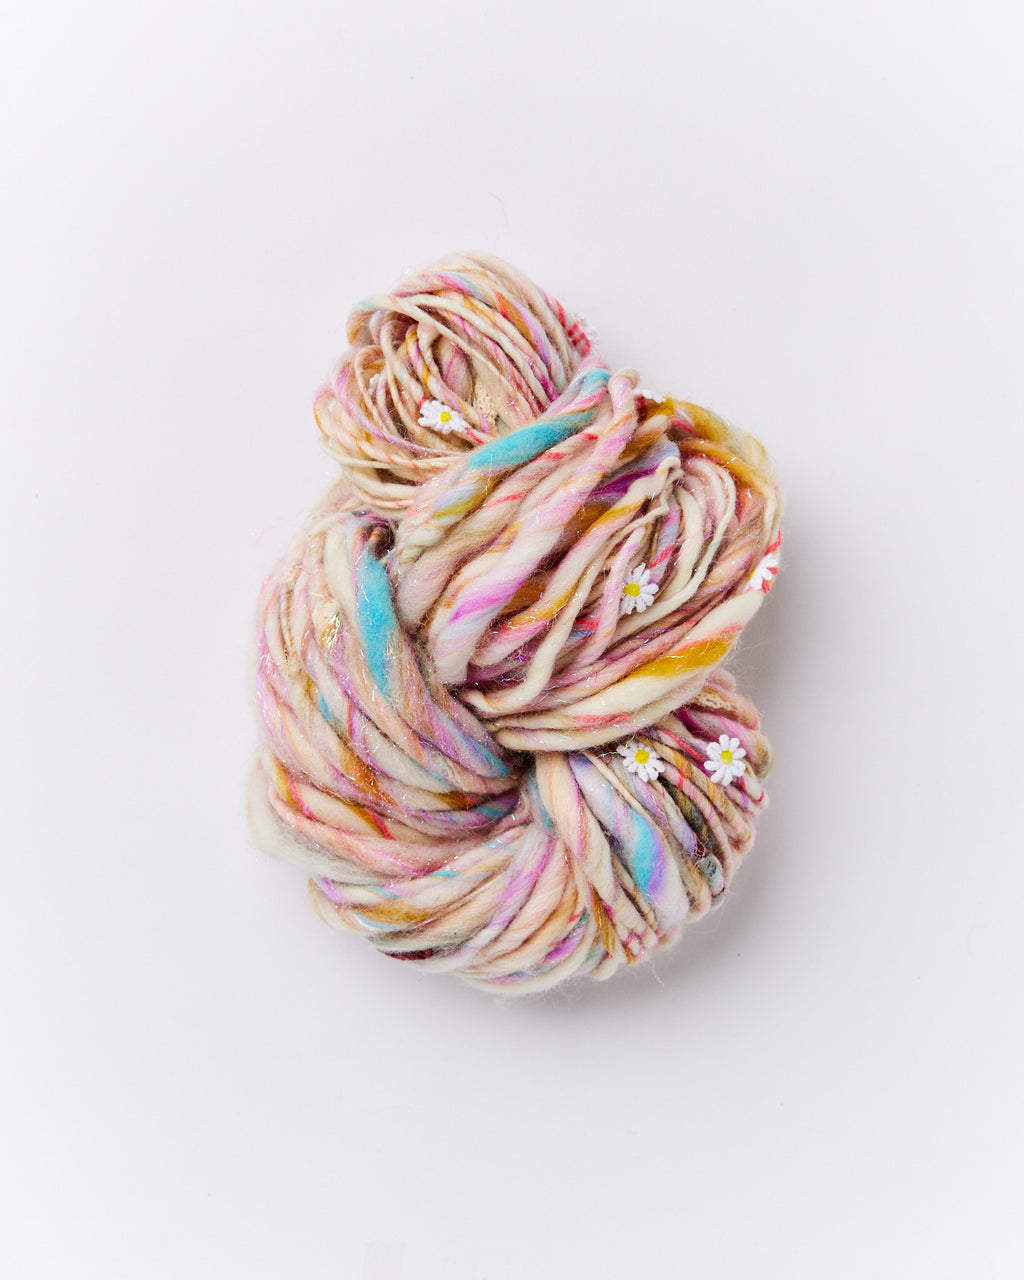 Daisy Chain Yarn in Grand Prismatic by Knit Collage - Chunky bulky Hand knitting yarn